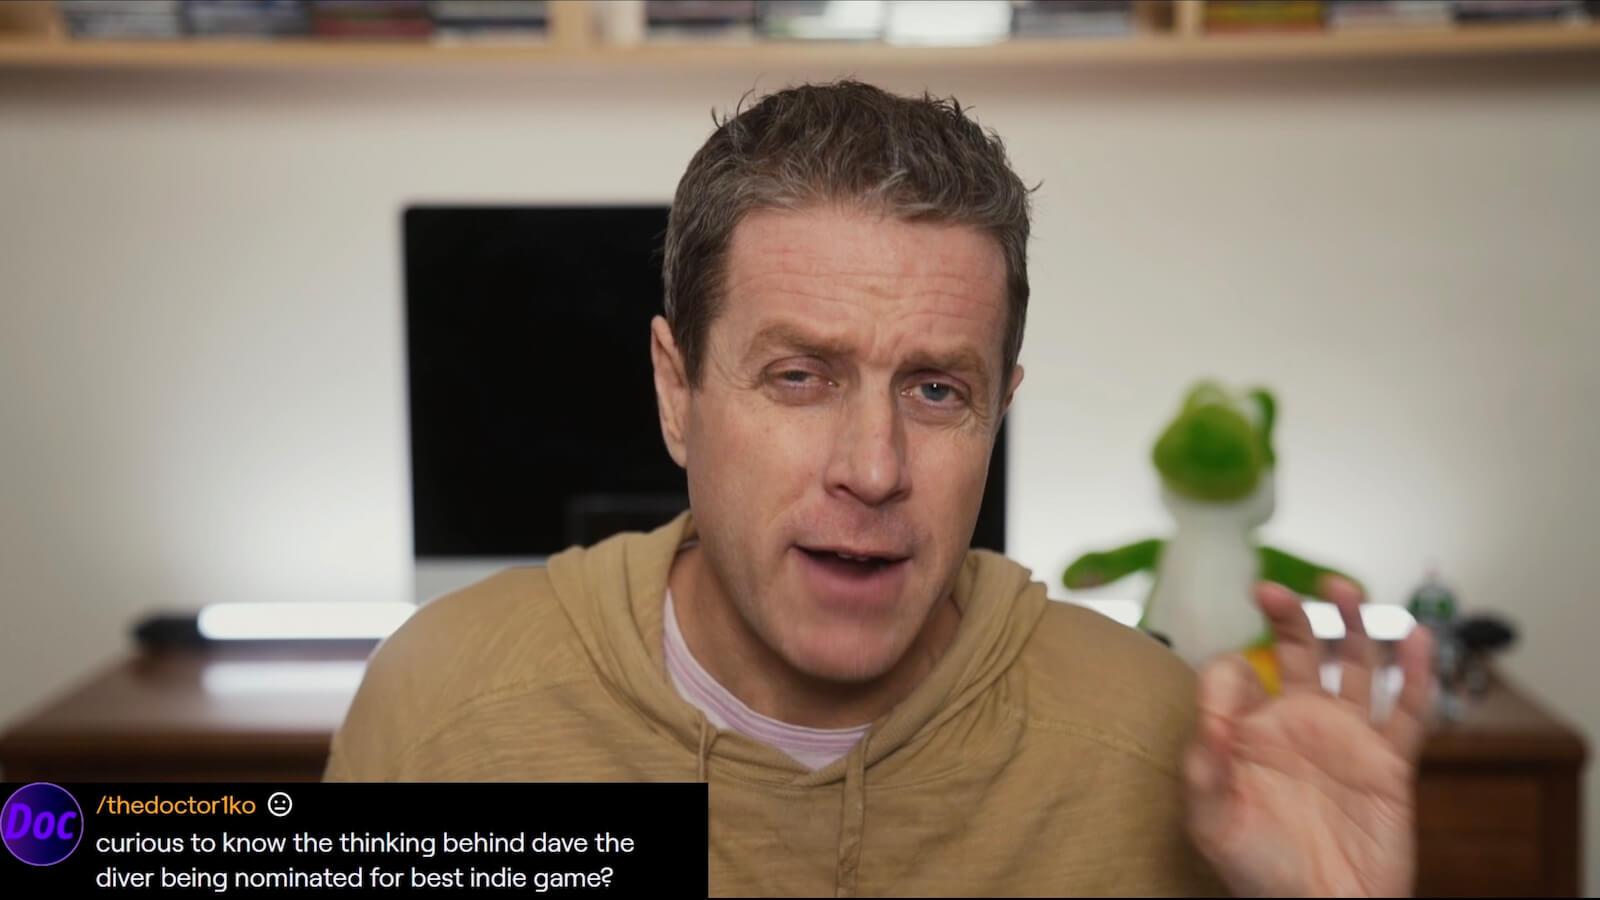 Death Stranding: How to Find Geoff Keighley